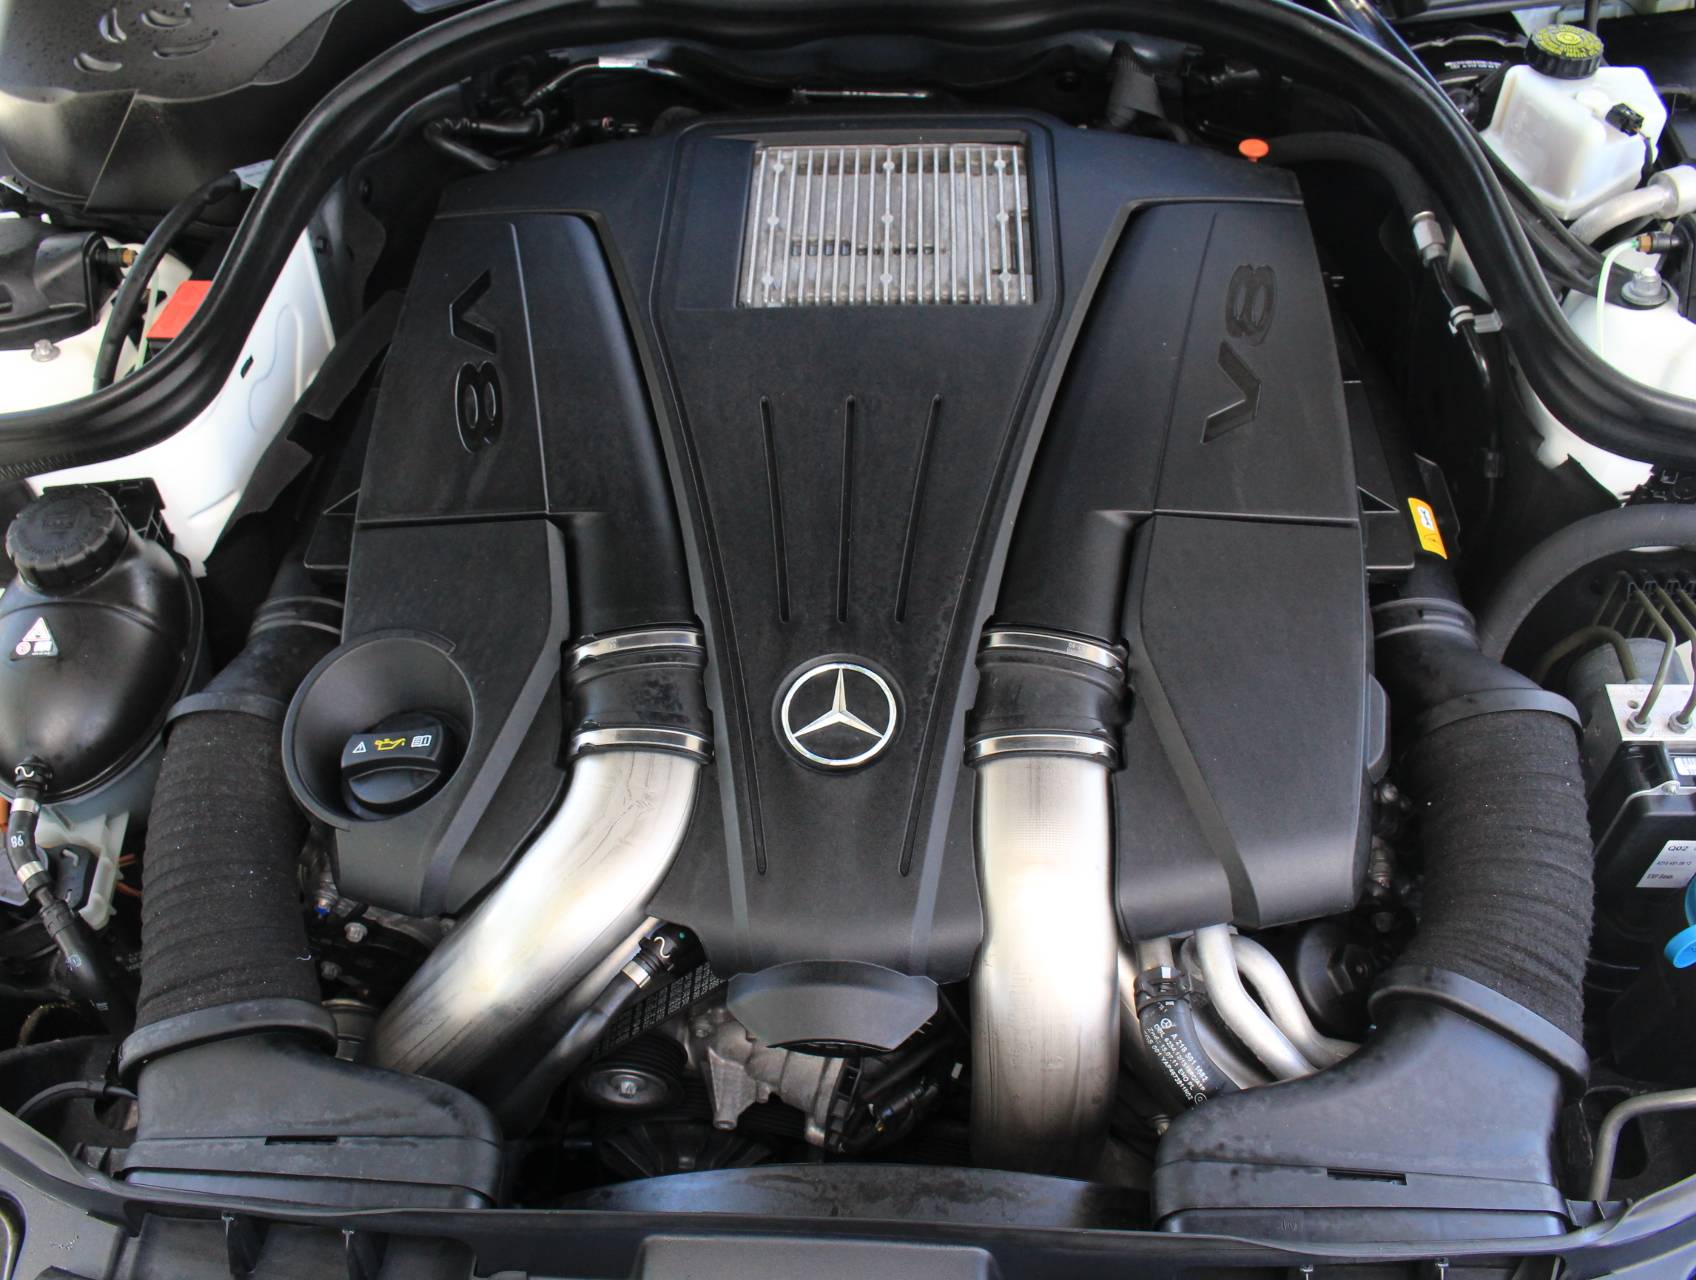 Florida Fine Cars - Used MERCEDES-BENZ CLS CLASS 2013 WEST PALM CLS550